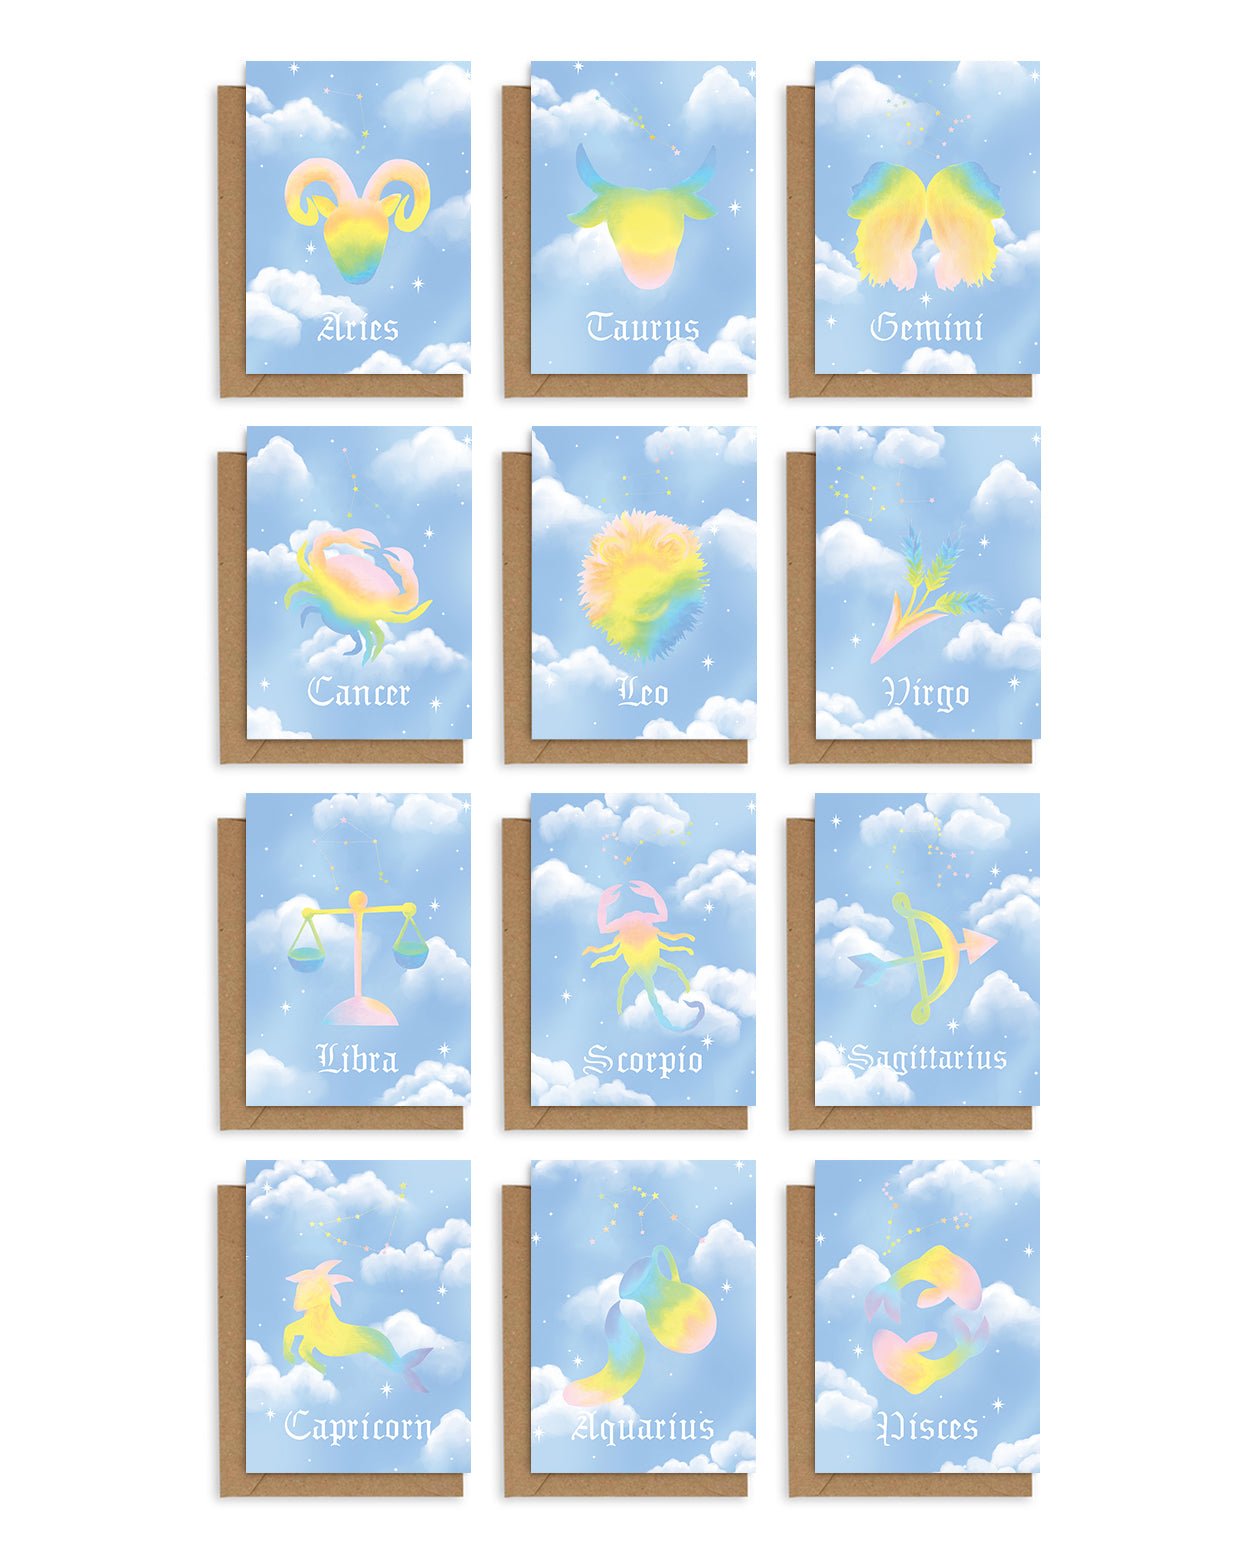 Adelfi Horoscope cards have a light blue background with white clouds and each of the twelve horoscope symbols painted in pastel rainbow colors. Shown with kraft envelope.